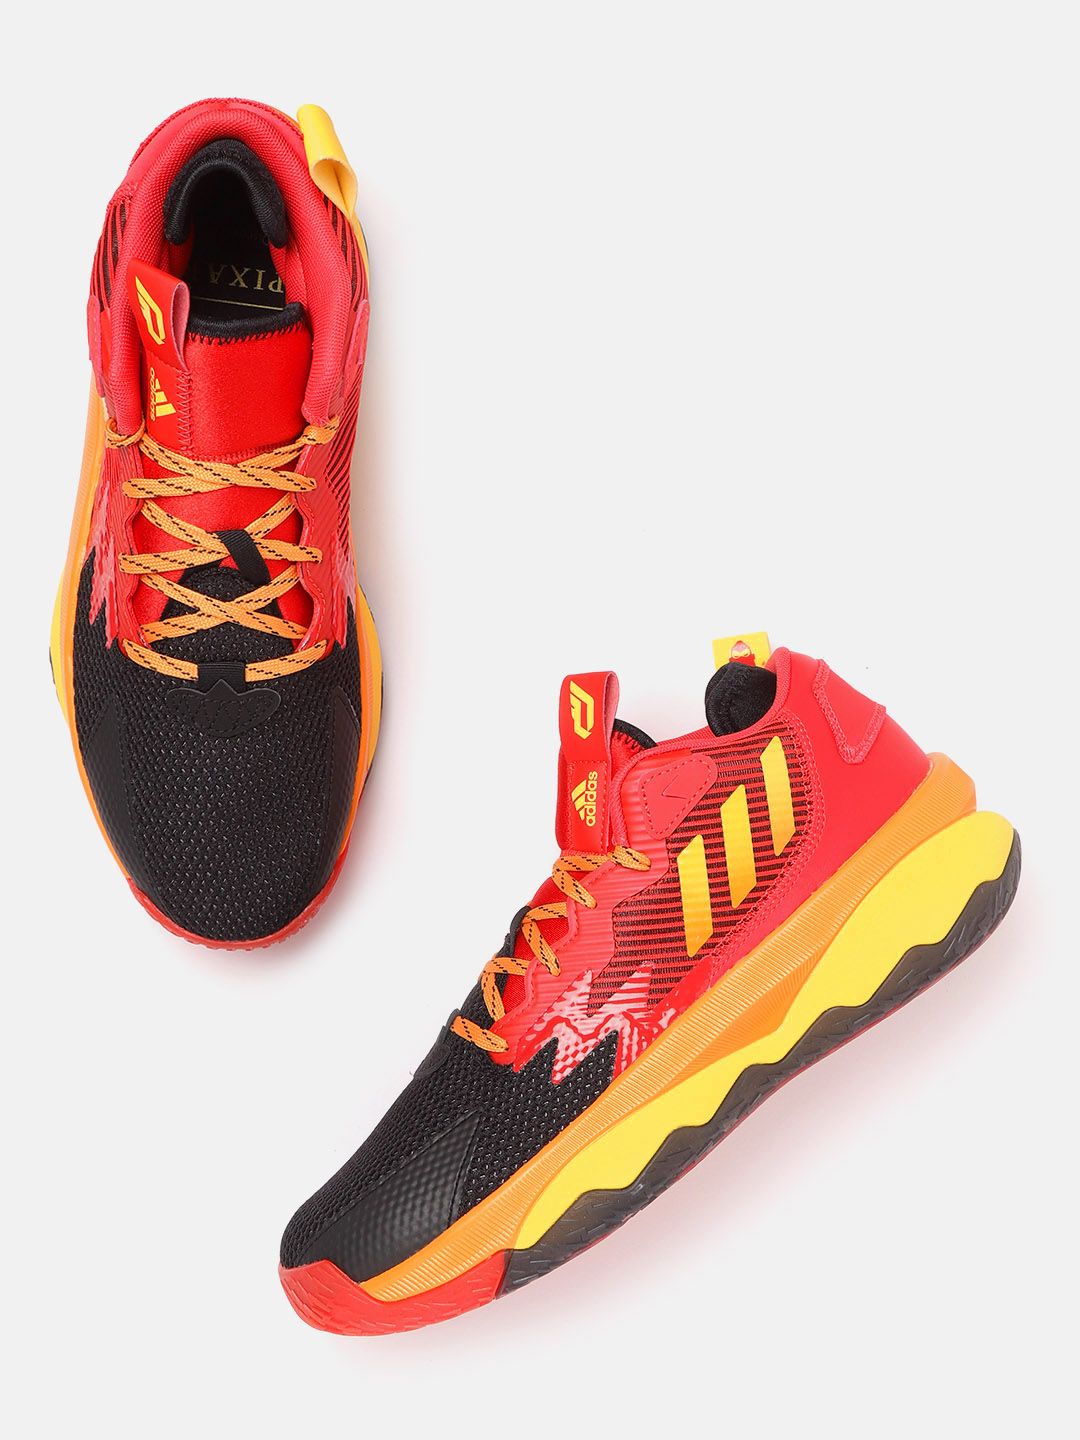 ADIDAS Unisex Black & Red Woven Design Dame 8 Basketball Shoes Price in India